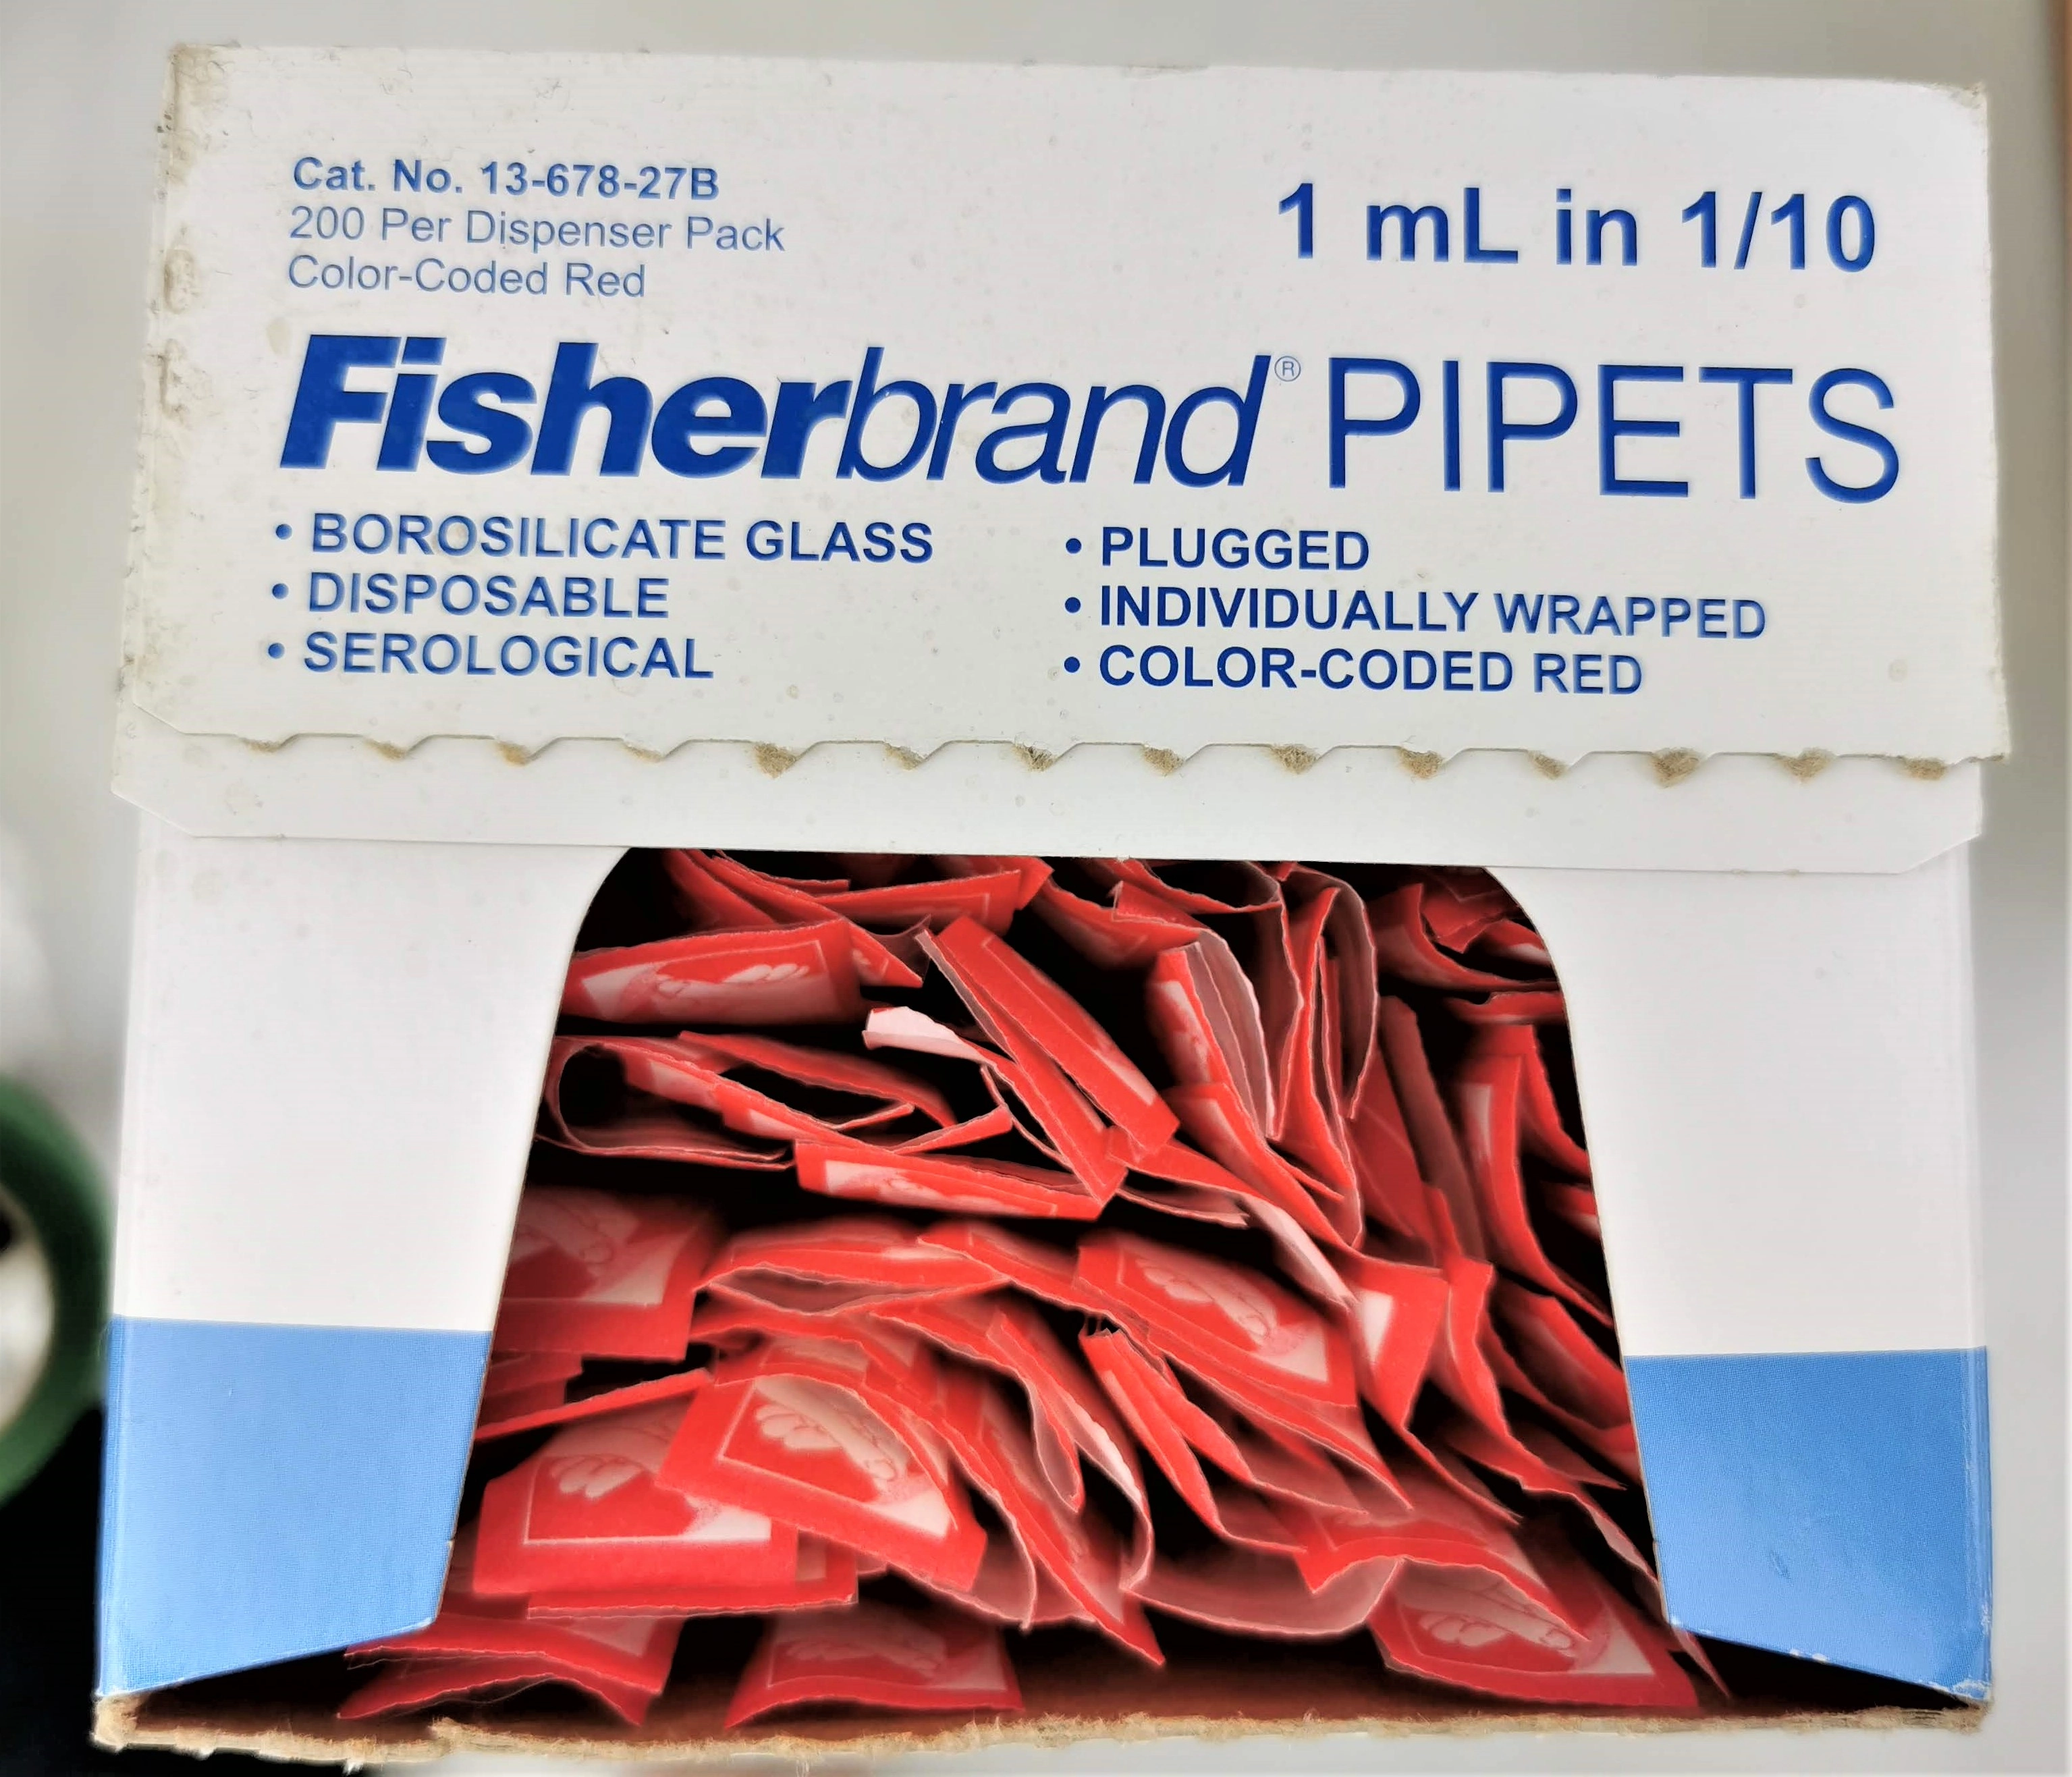 Fisherbrand 13-678-27B Glass Disposable Serological Pipets - 1mL in 1/10 (Pack of 166)